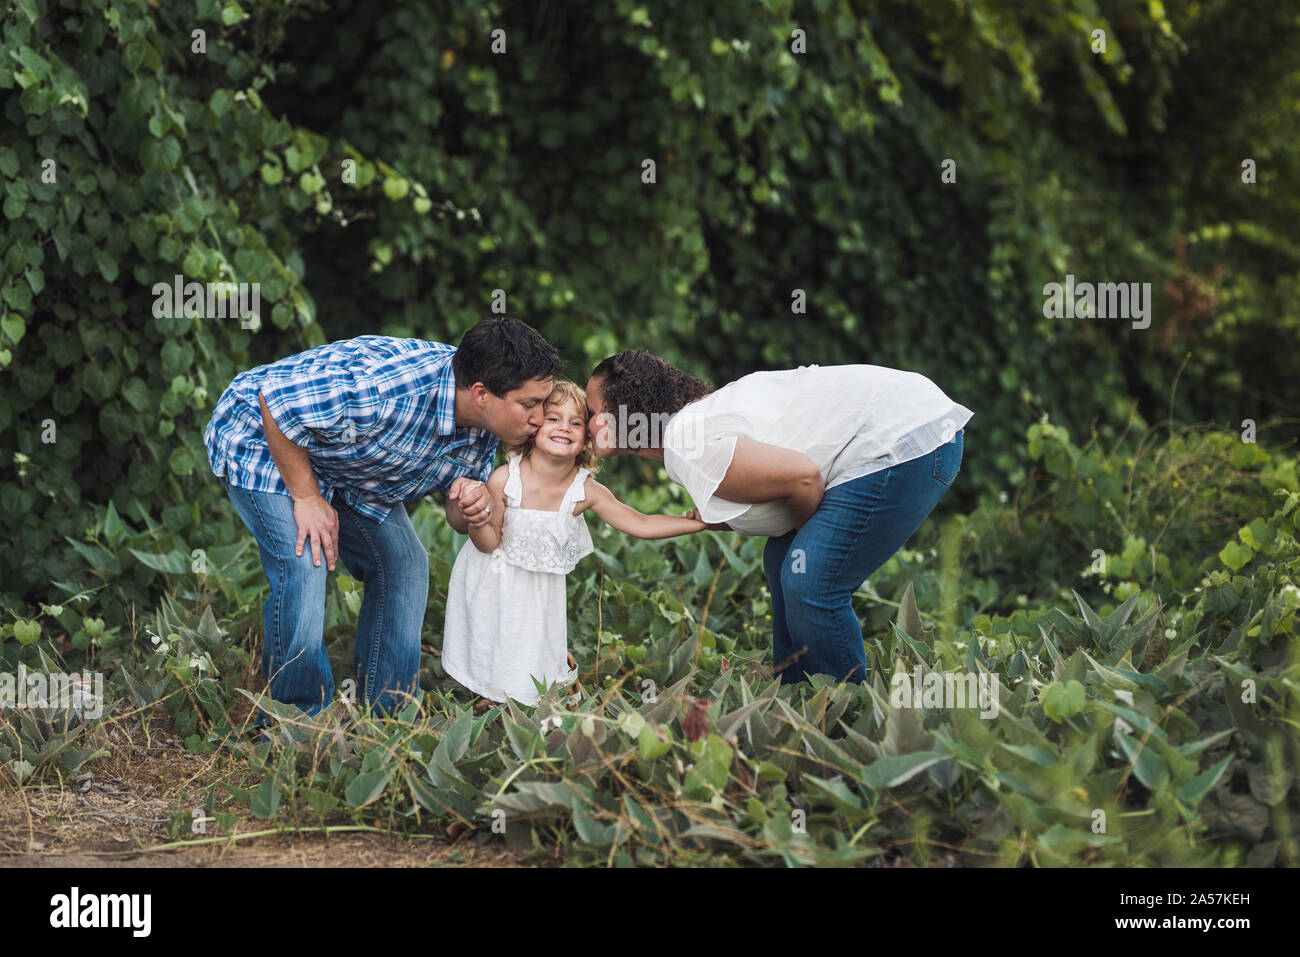 Mom & dad bending down to kiss young daughter near wall of vegetation Stock Photo